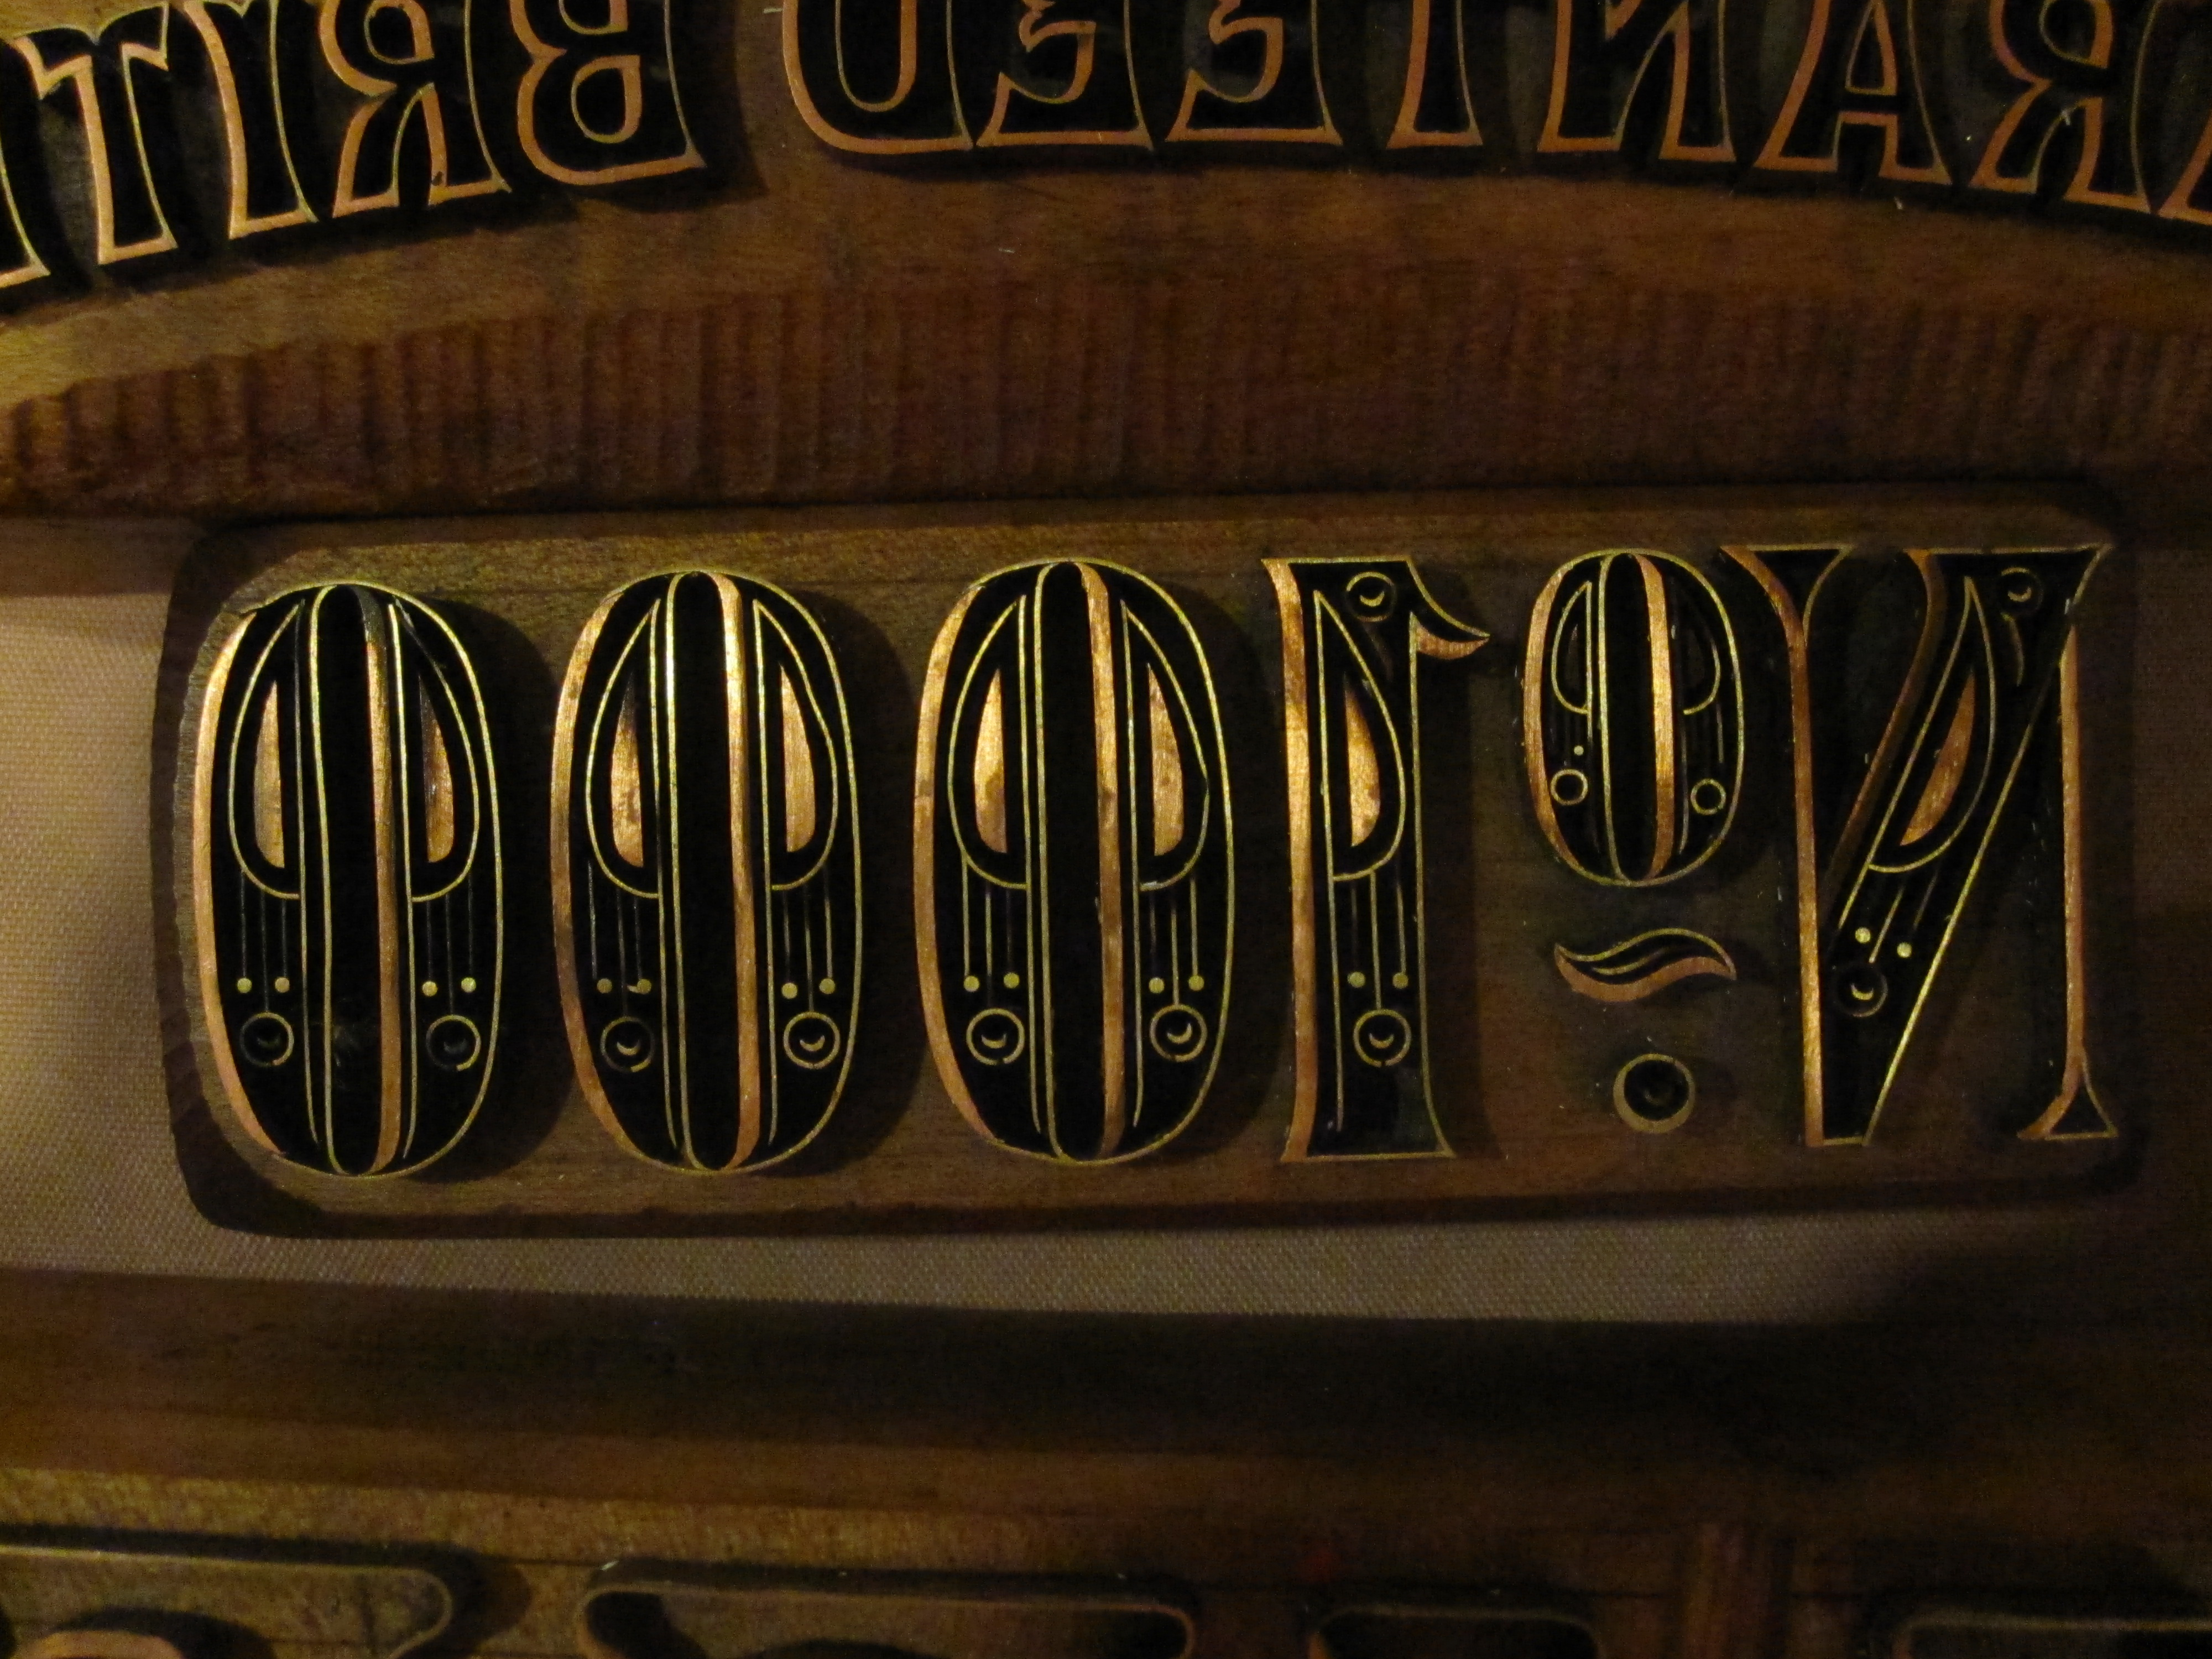 Woodblock typography, mirrored horizontally as it would appear when used on paper.